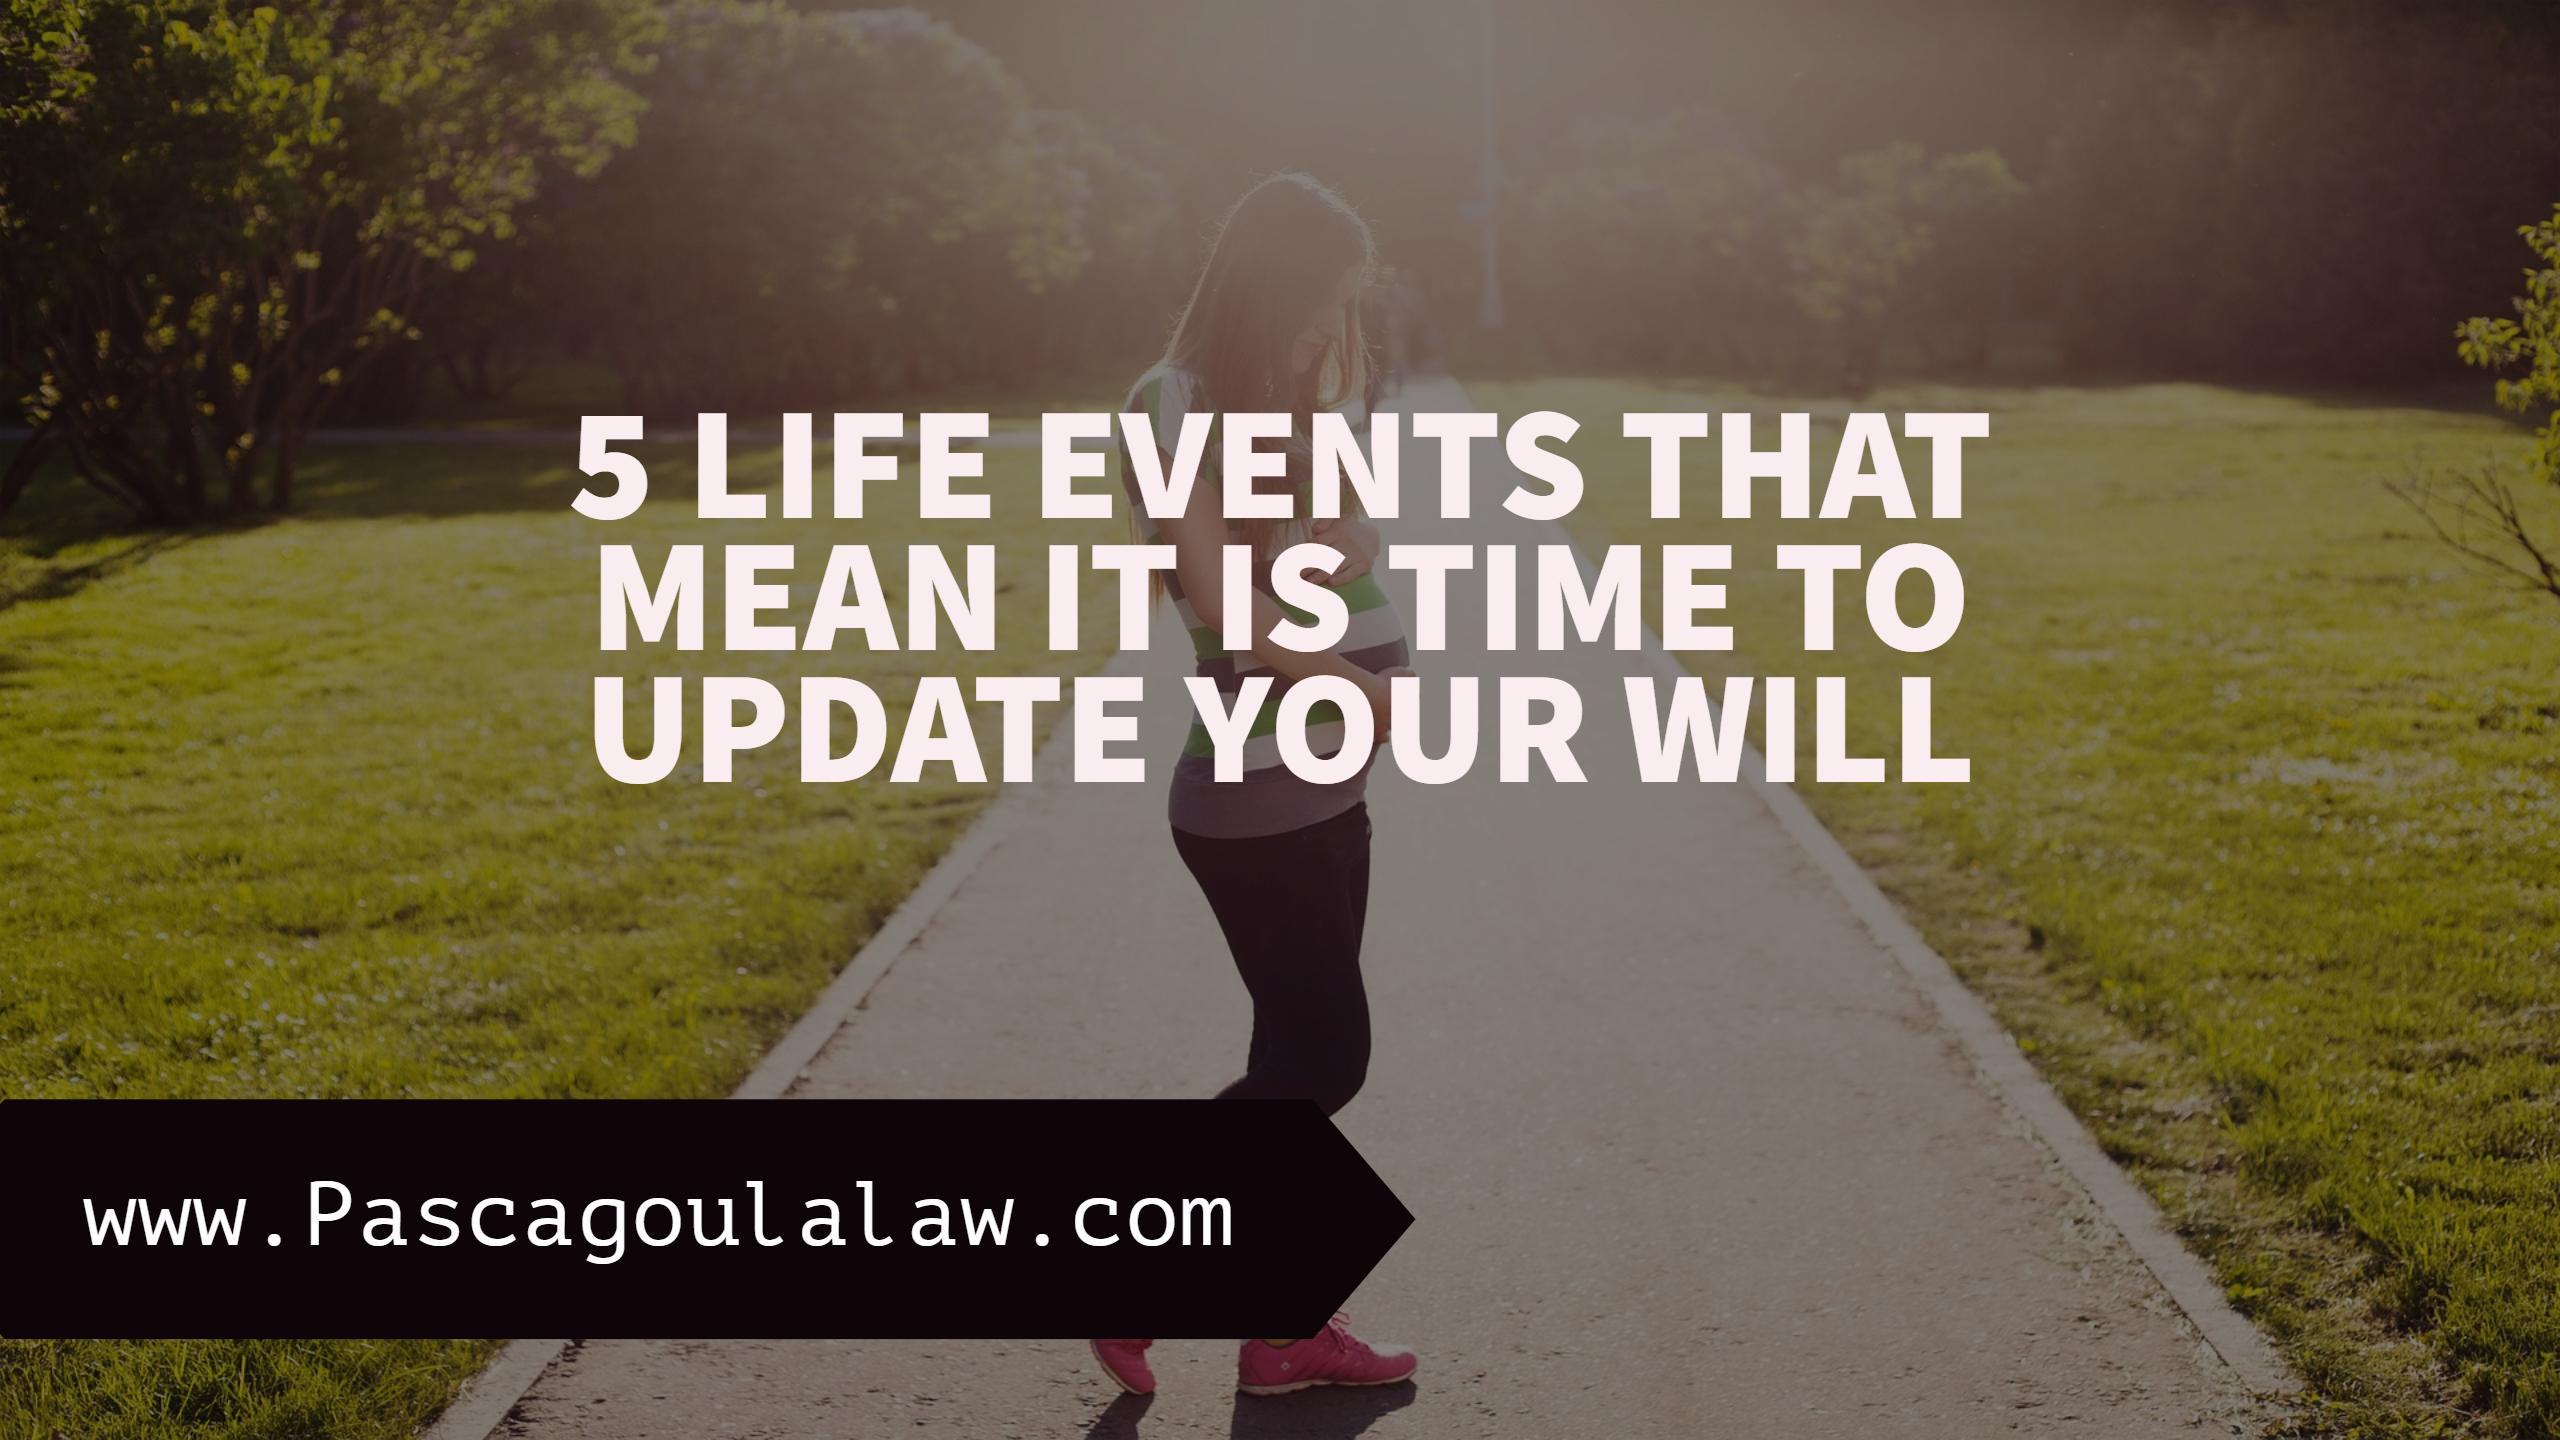 FIVE LIFE EVENTS THAT MEAN IT IS TIME TO UPDATE YOUR WILL